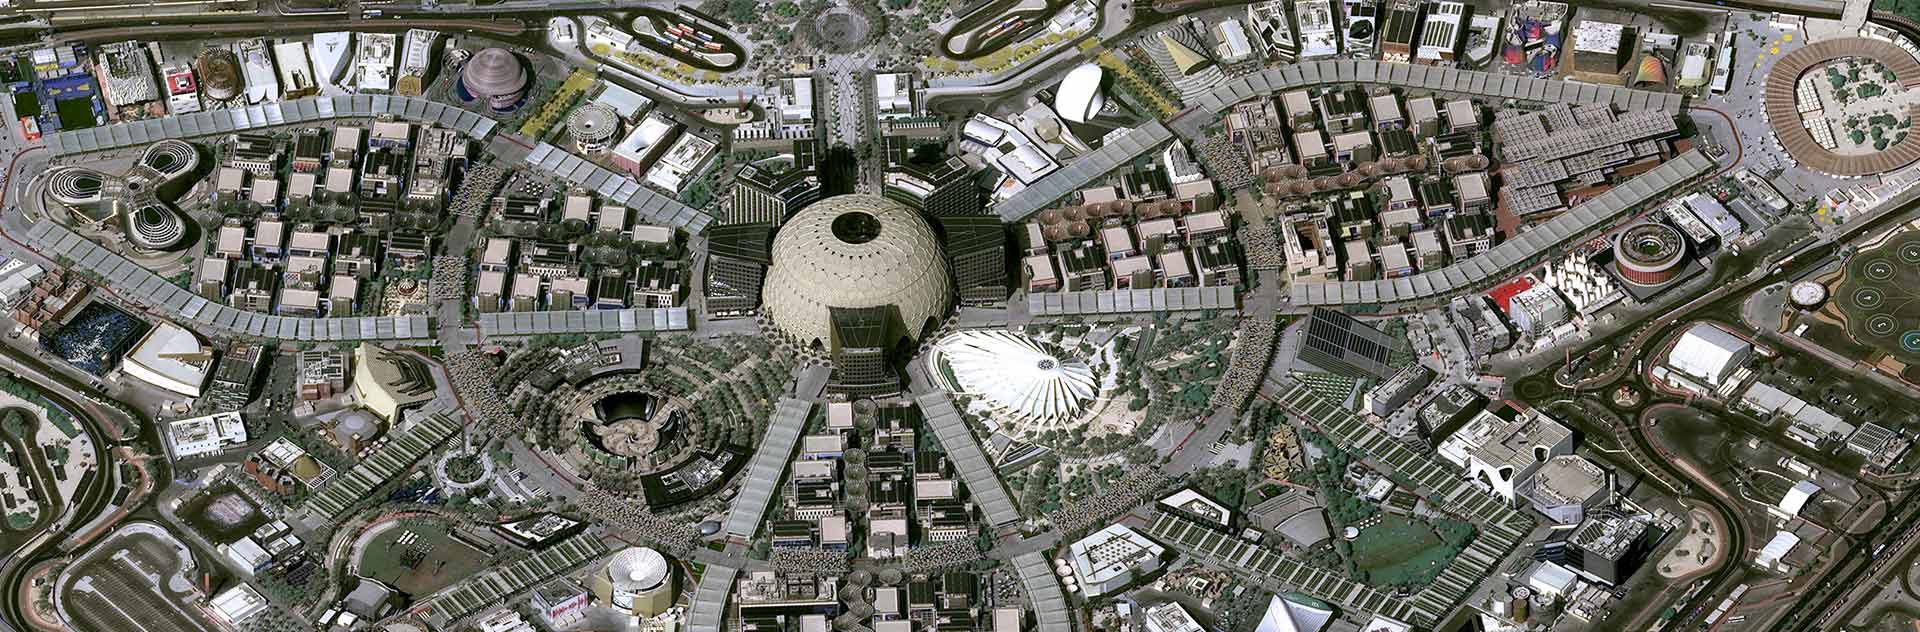 Monitoring of the Dubai World Expo Construction Site from Space